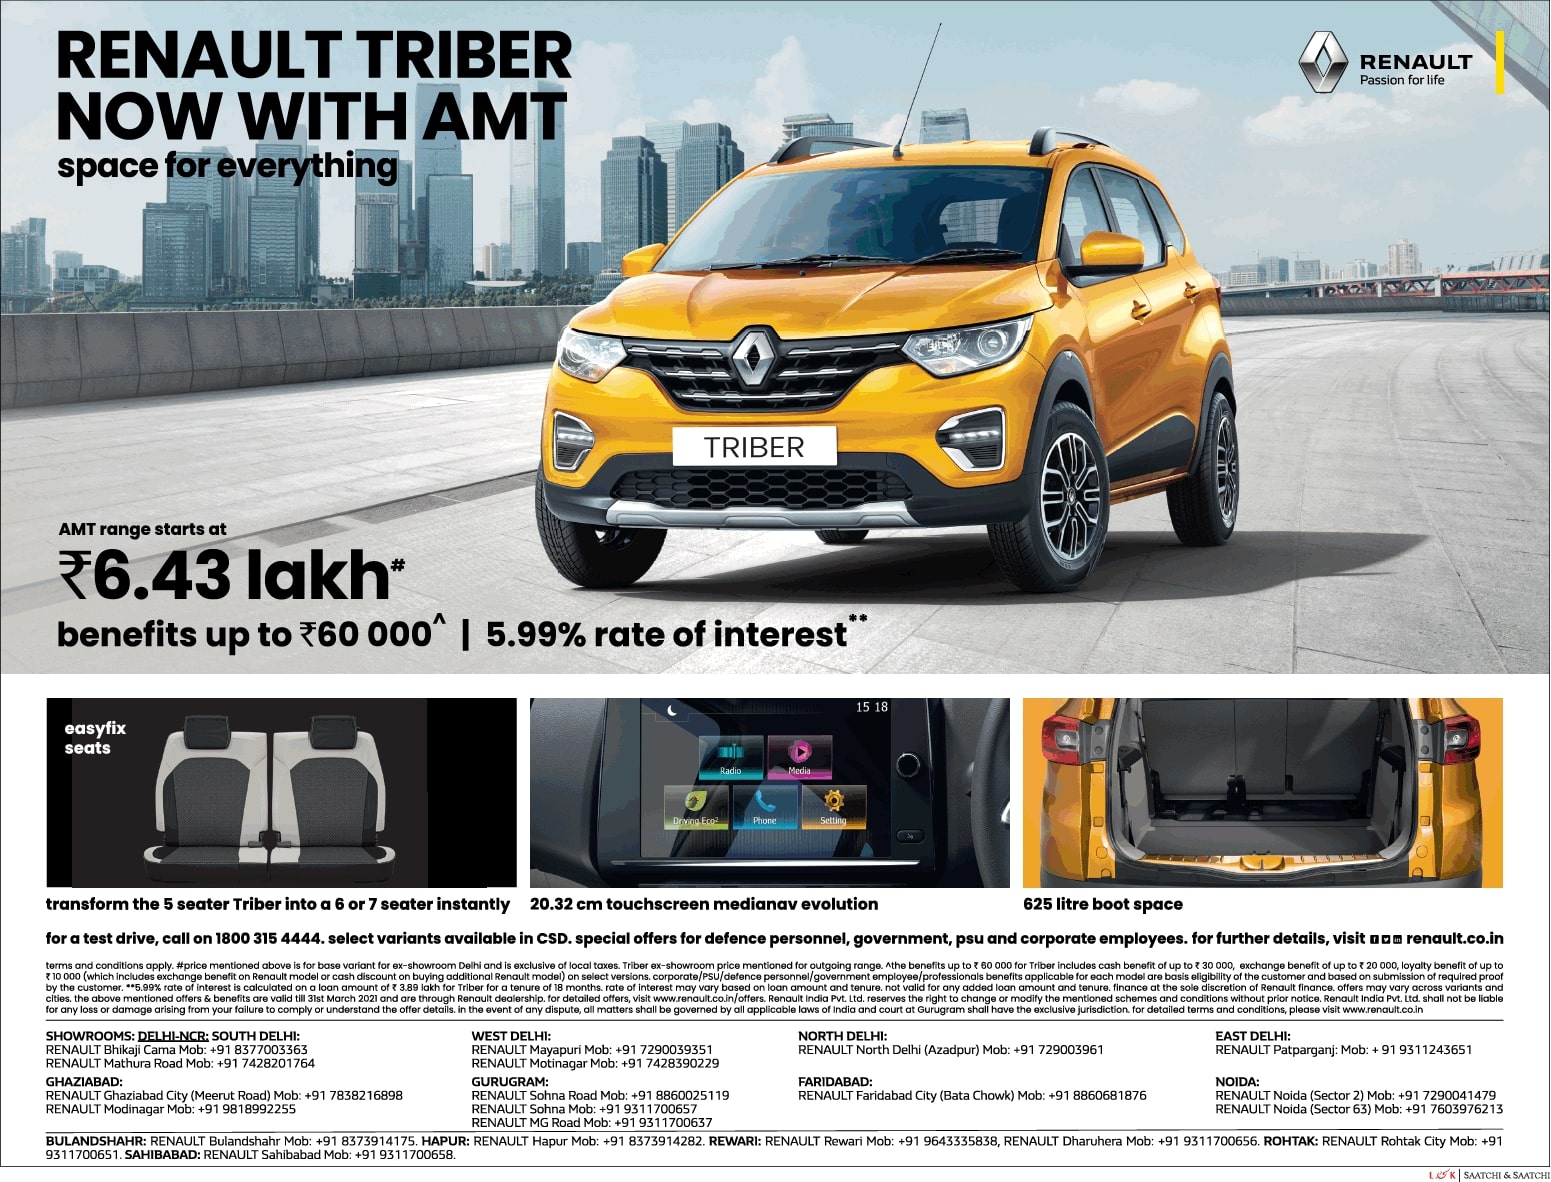 renault-triber-now-with-amt-at-6-43-lakh-ad-delhi-times-16-03-2021